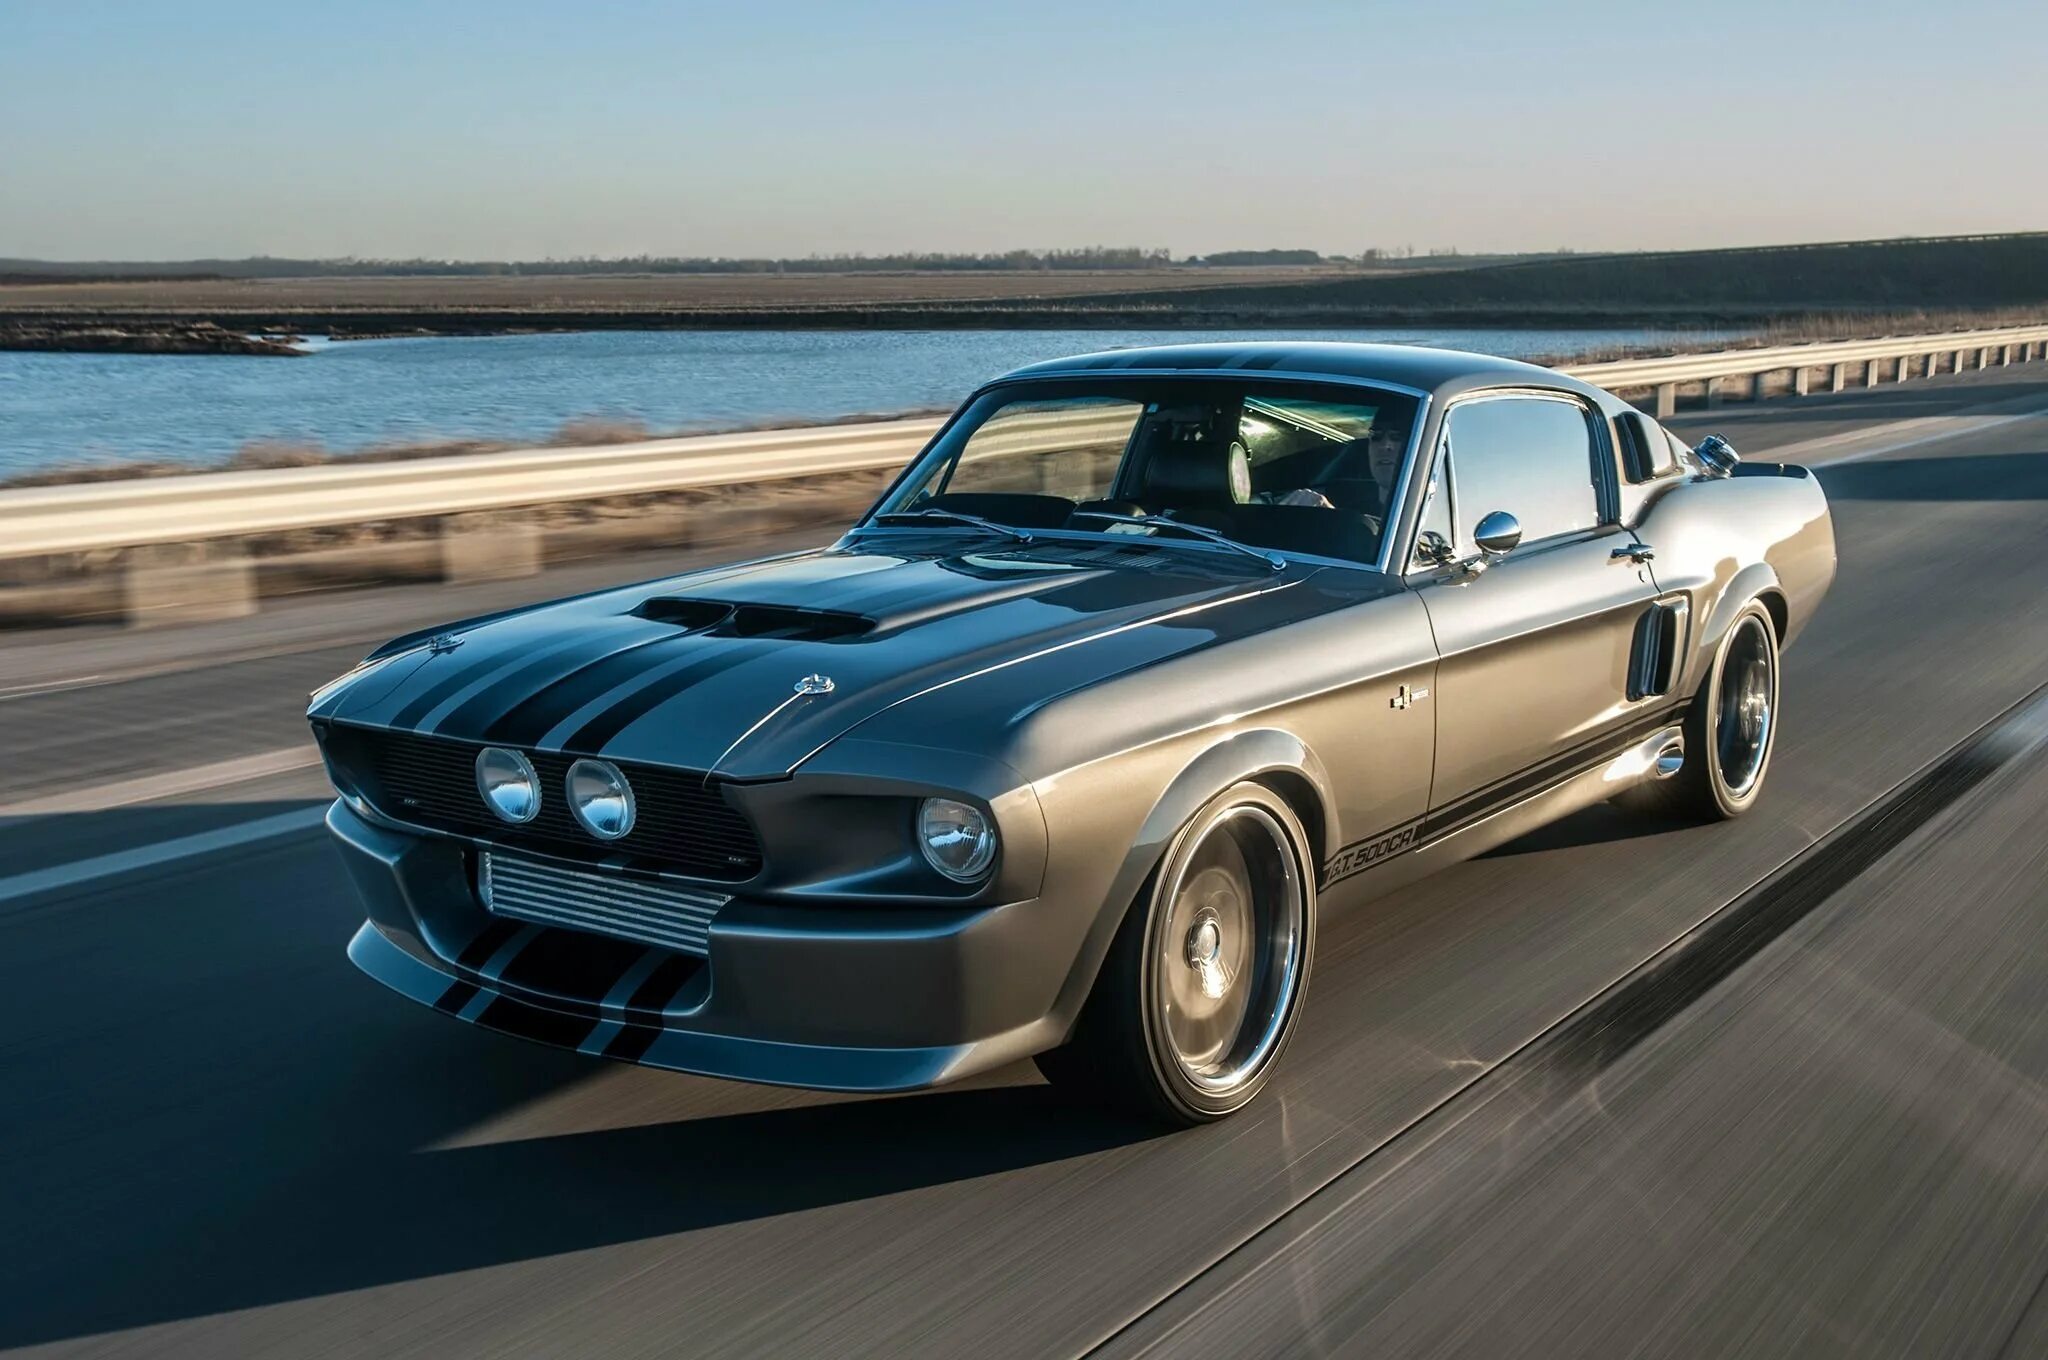 Mustang shelby gt. Форд Мустанг gt 500 1967. Форд Мустанг Шелби gt 500. Форд Мустанг Шелби 1967. Форд Мустанг 1967 Shelby gt500.